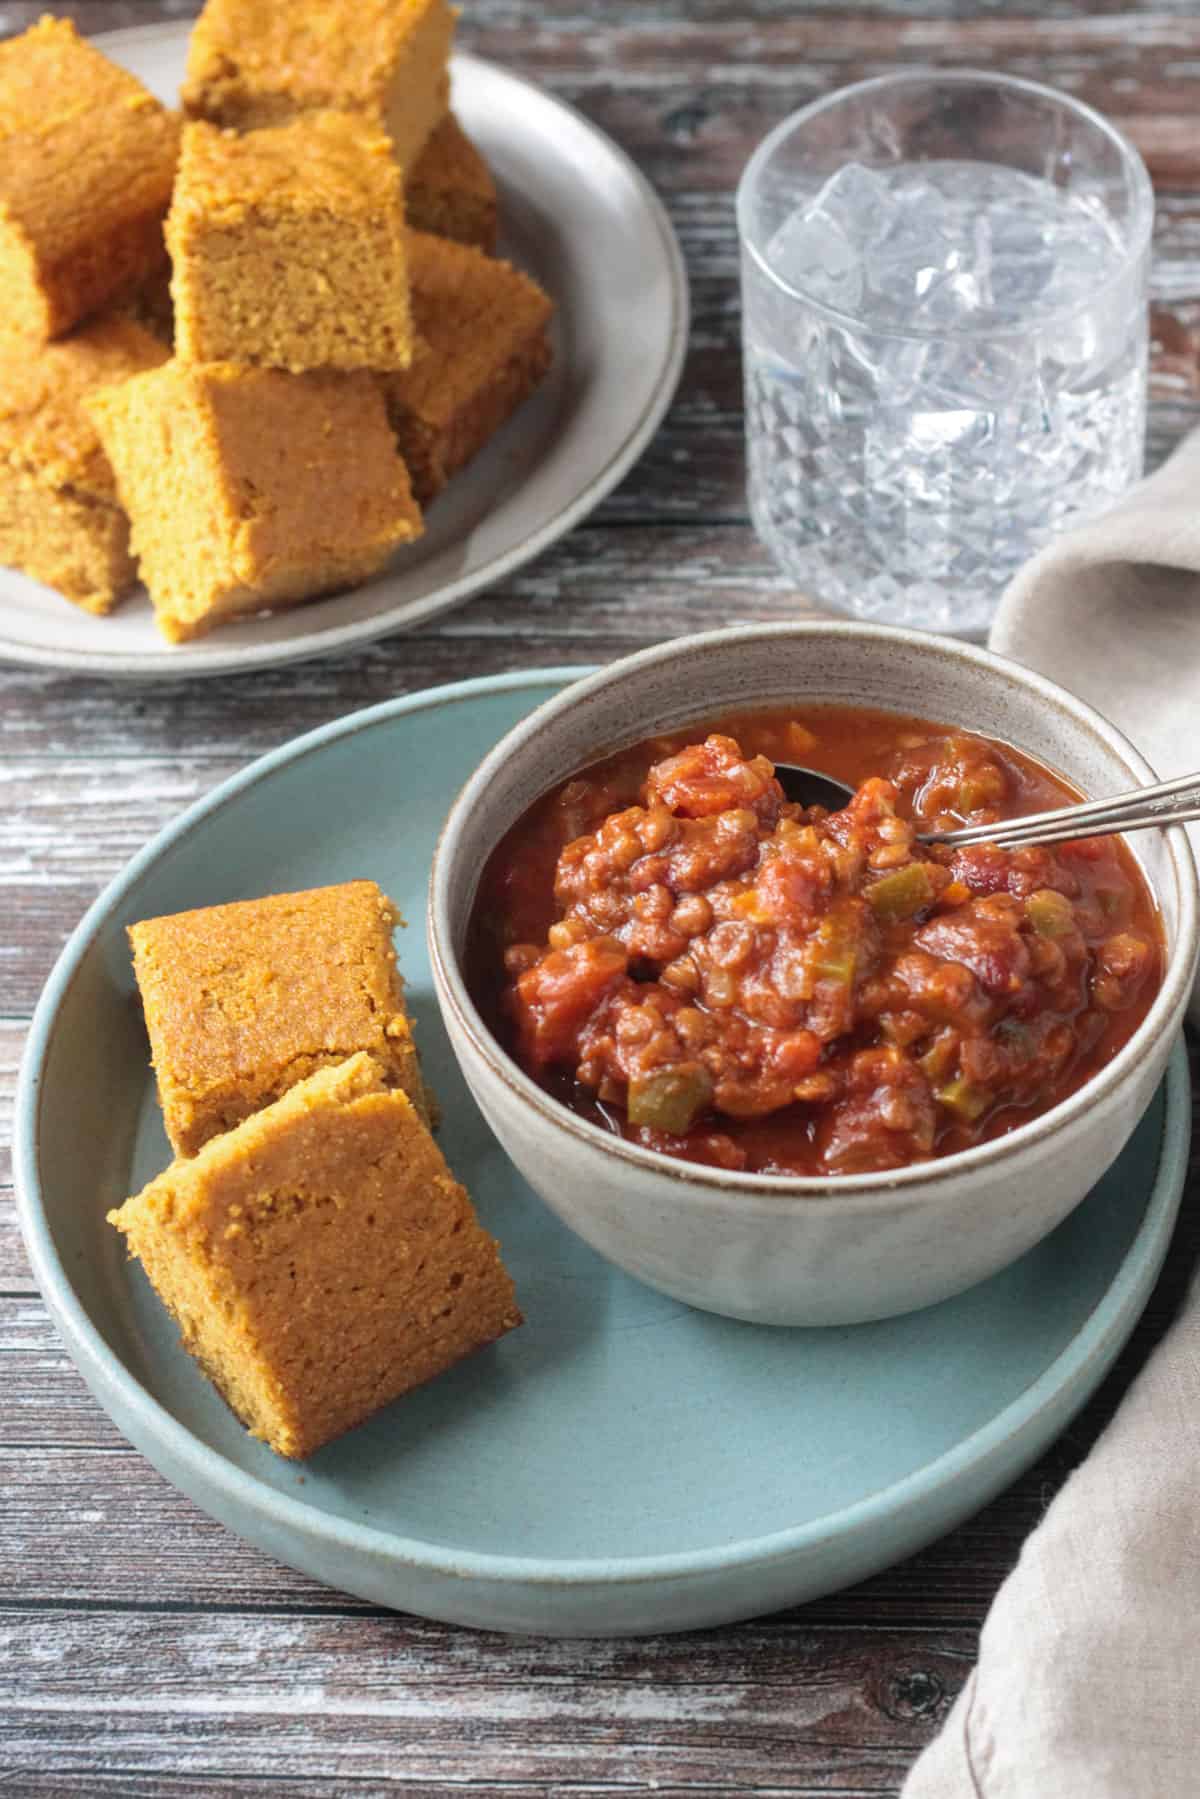 Two squares of cornbread on a plate next to a bowl of chili.